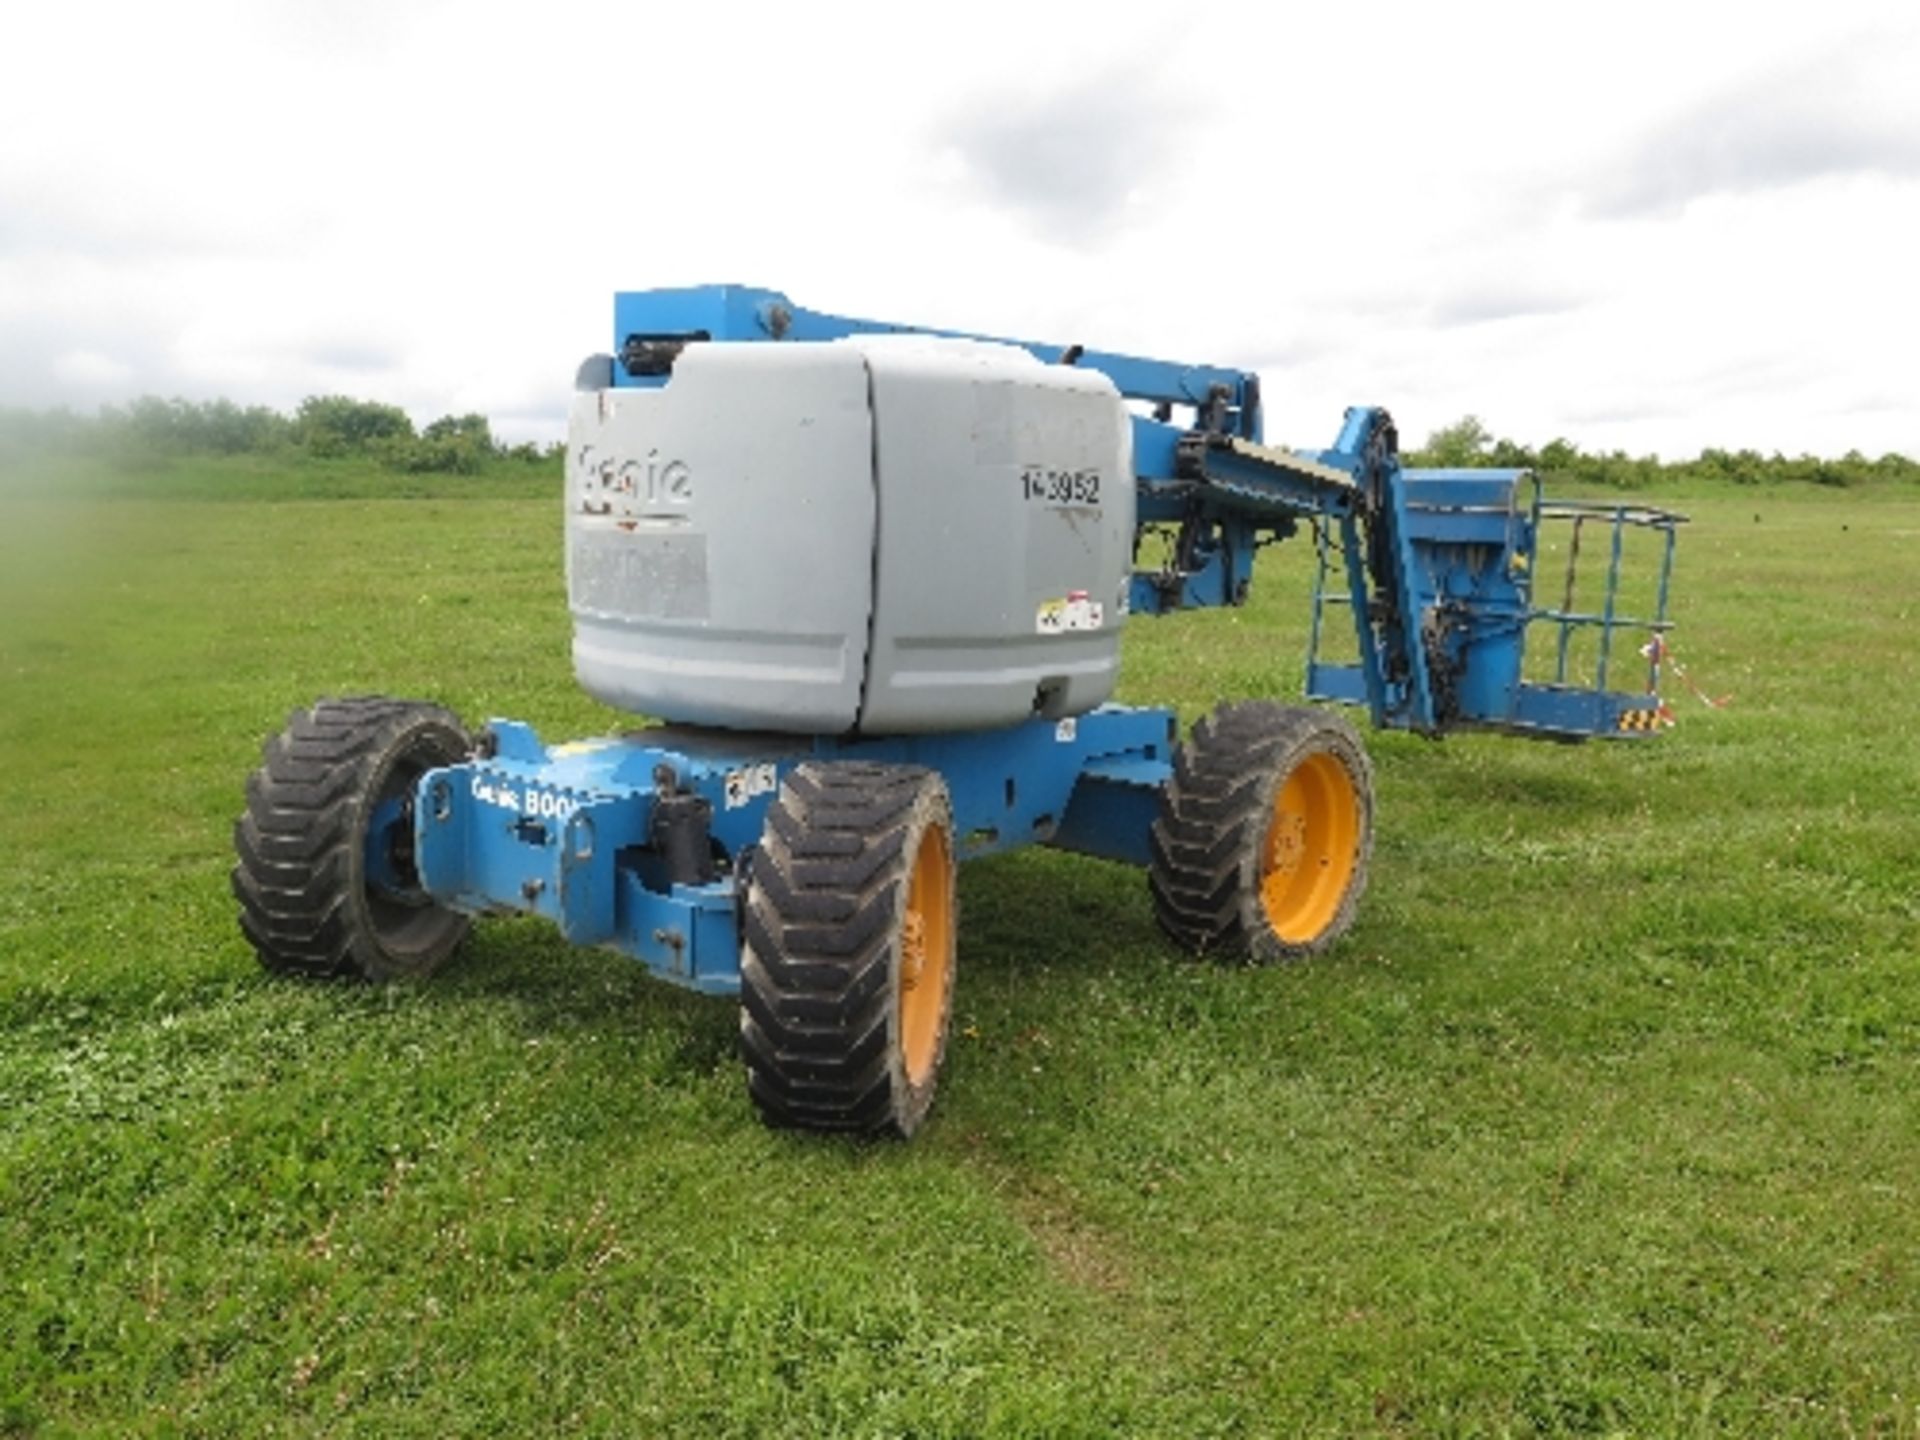 Genie Z45/25 artic boom 2153 hrs 2005 143952ALL LOTS are SOLD AS SEEN WITHOUT WARRANTY expressed,